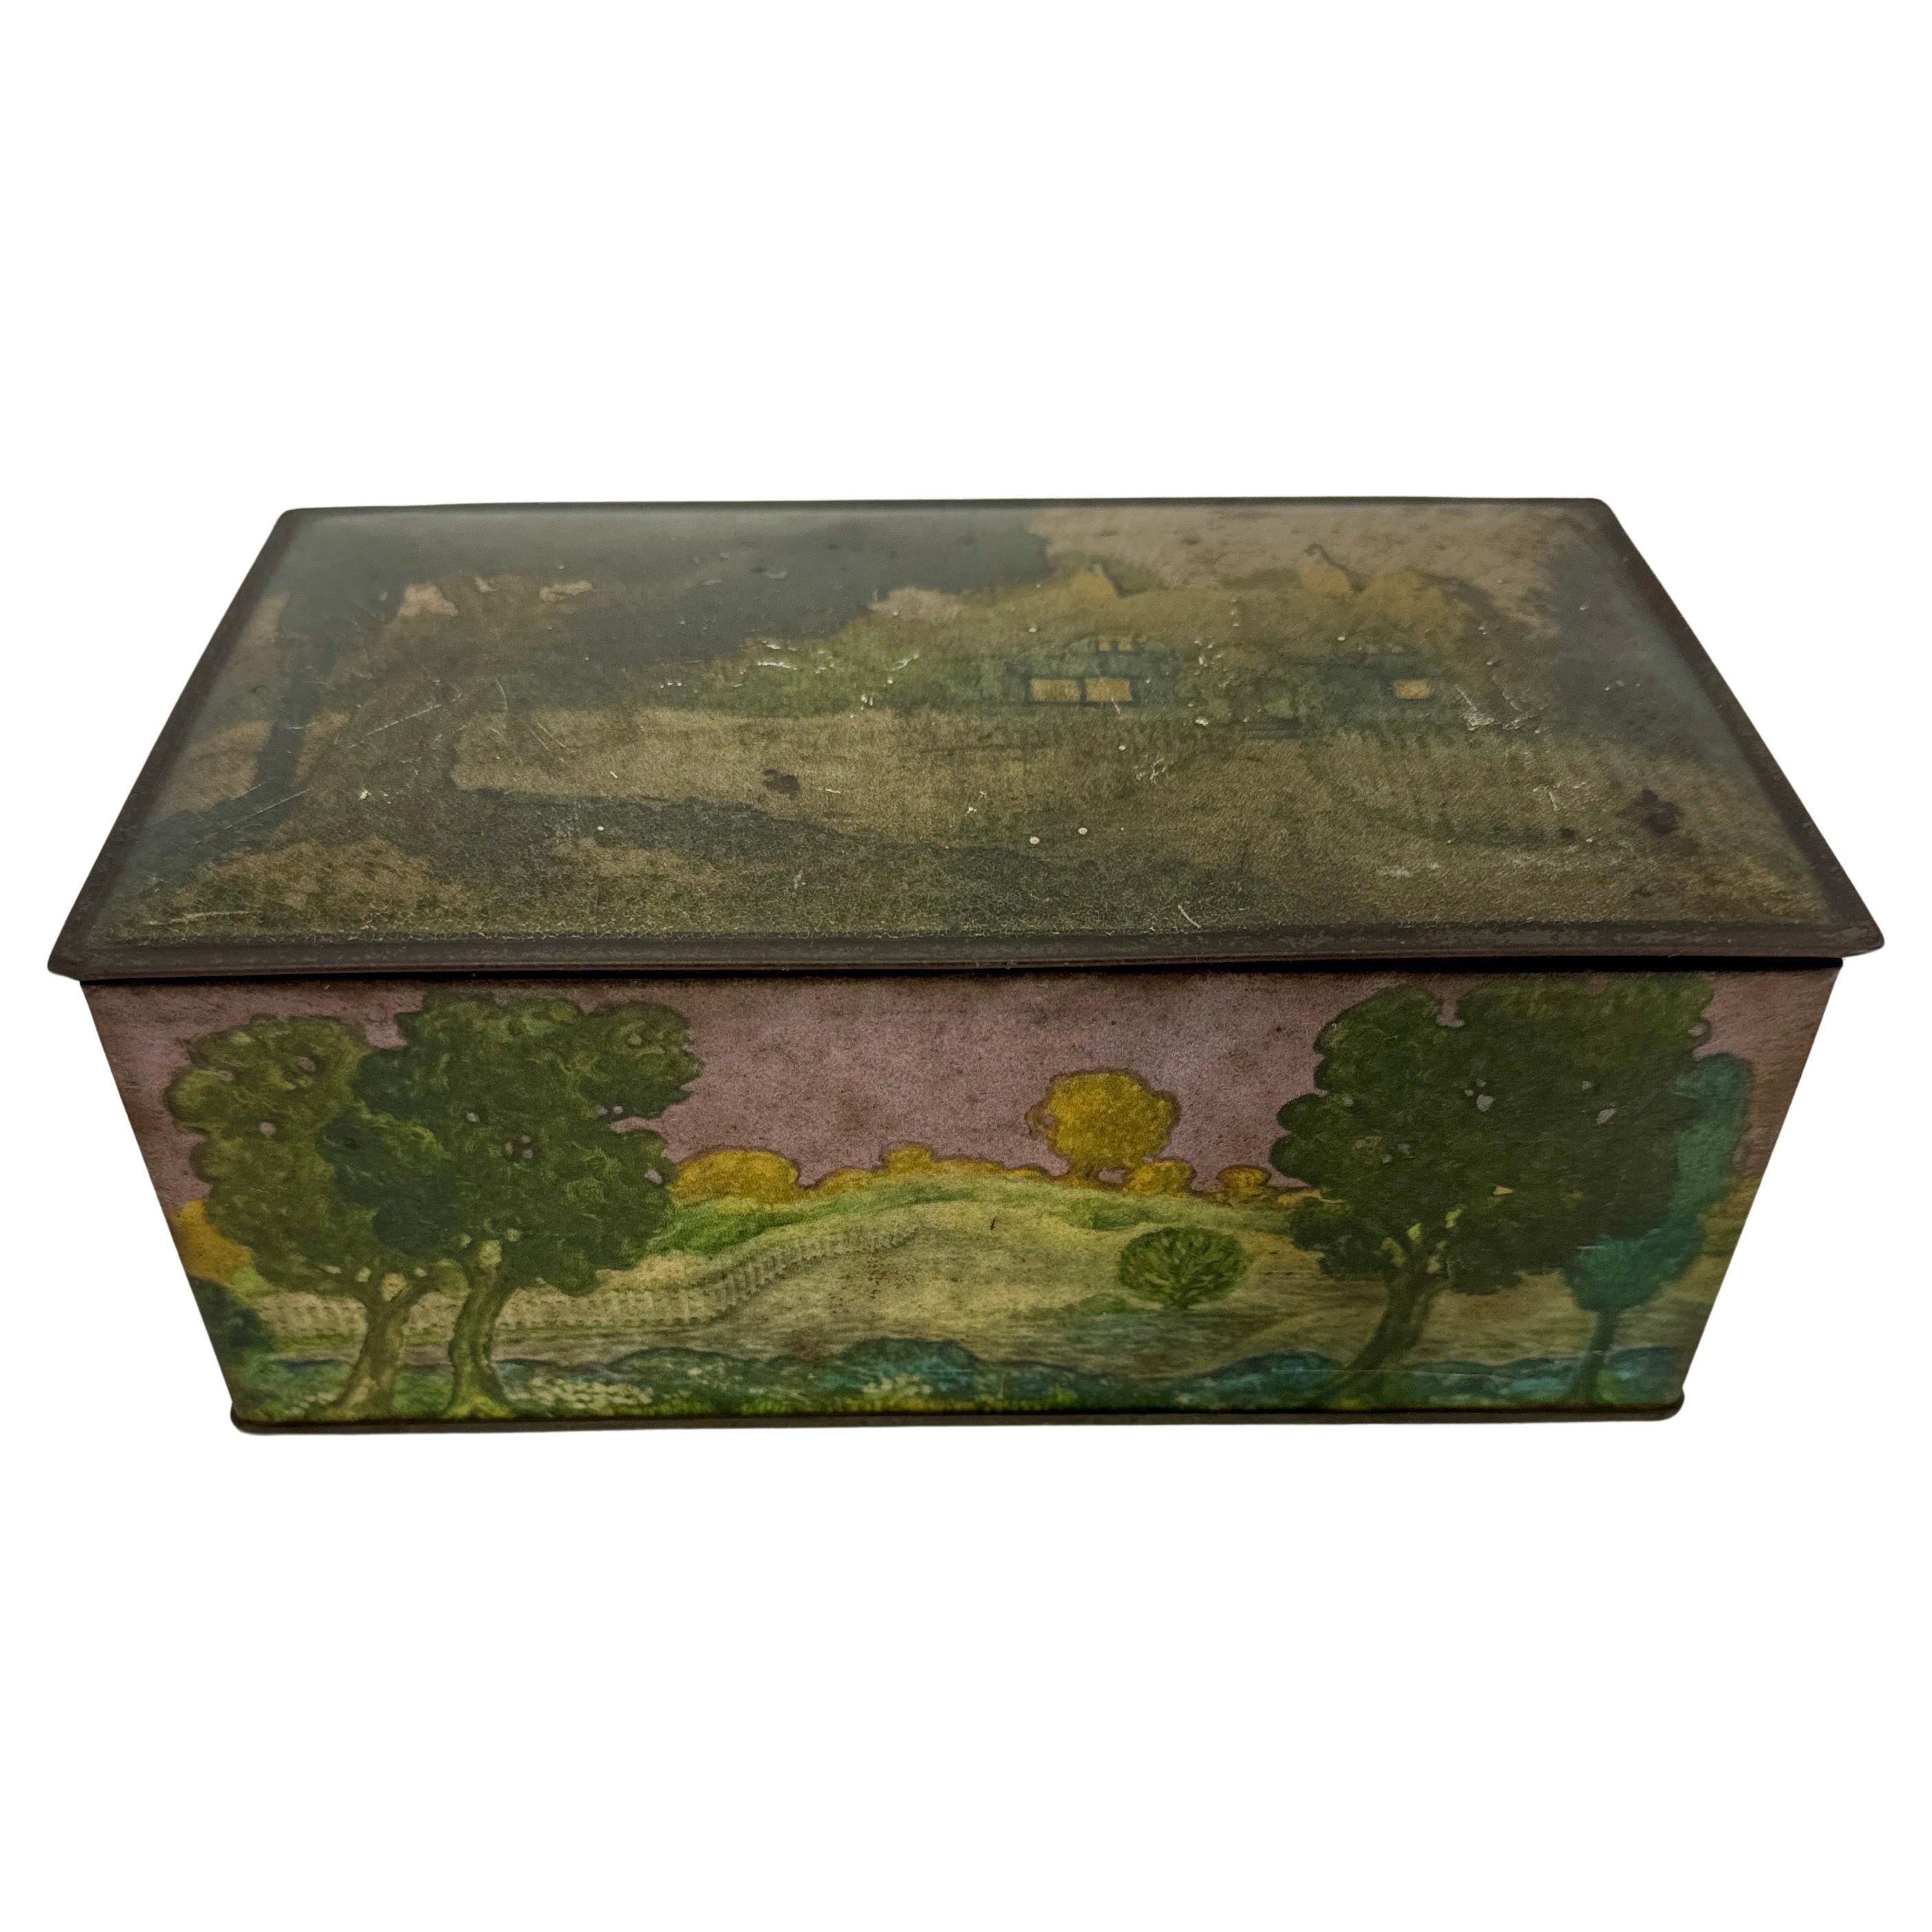 American Painted Tin Rectangular Box with Landscape from Canco